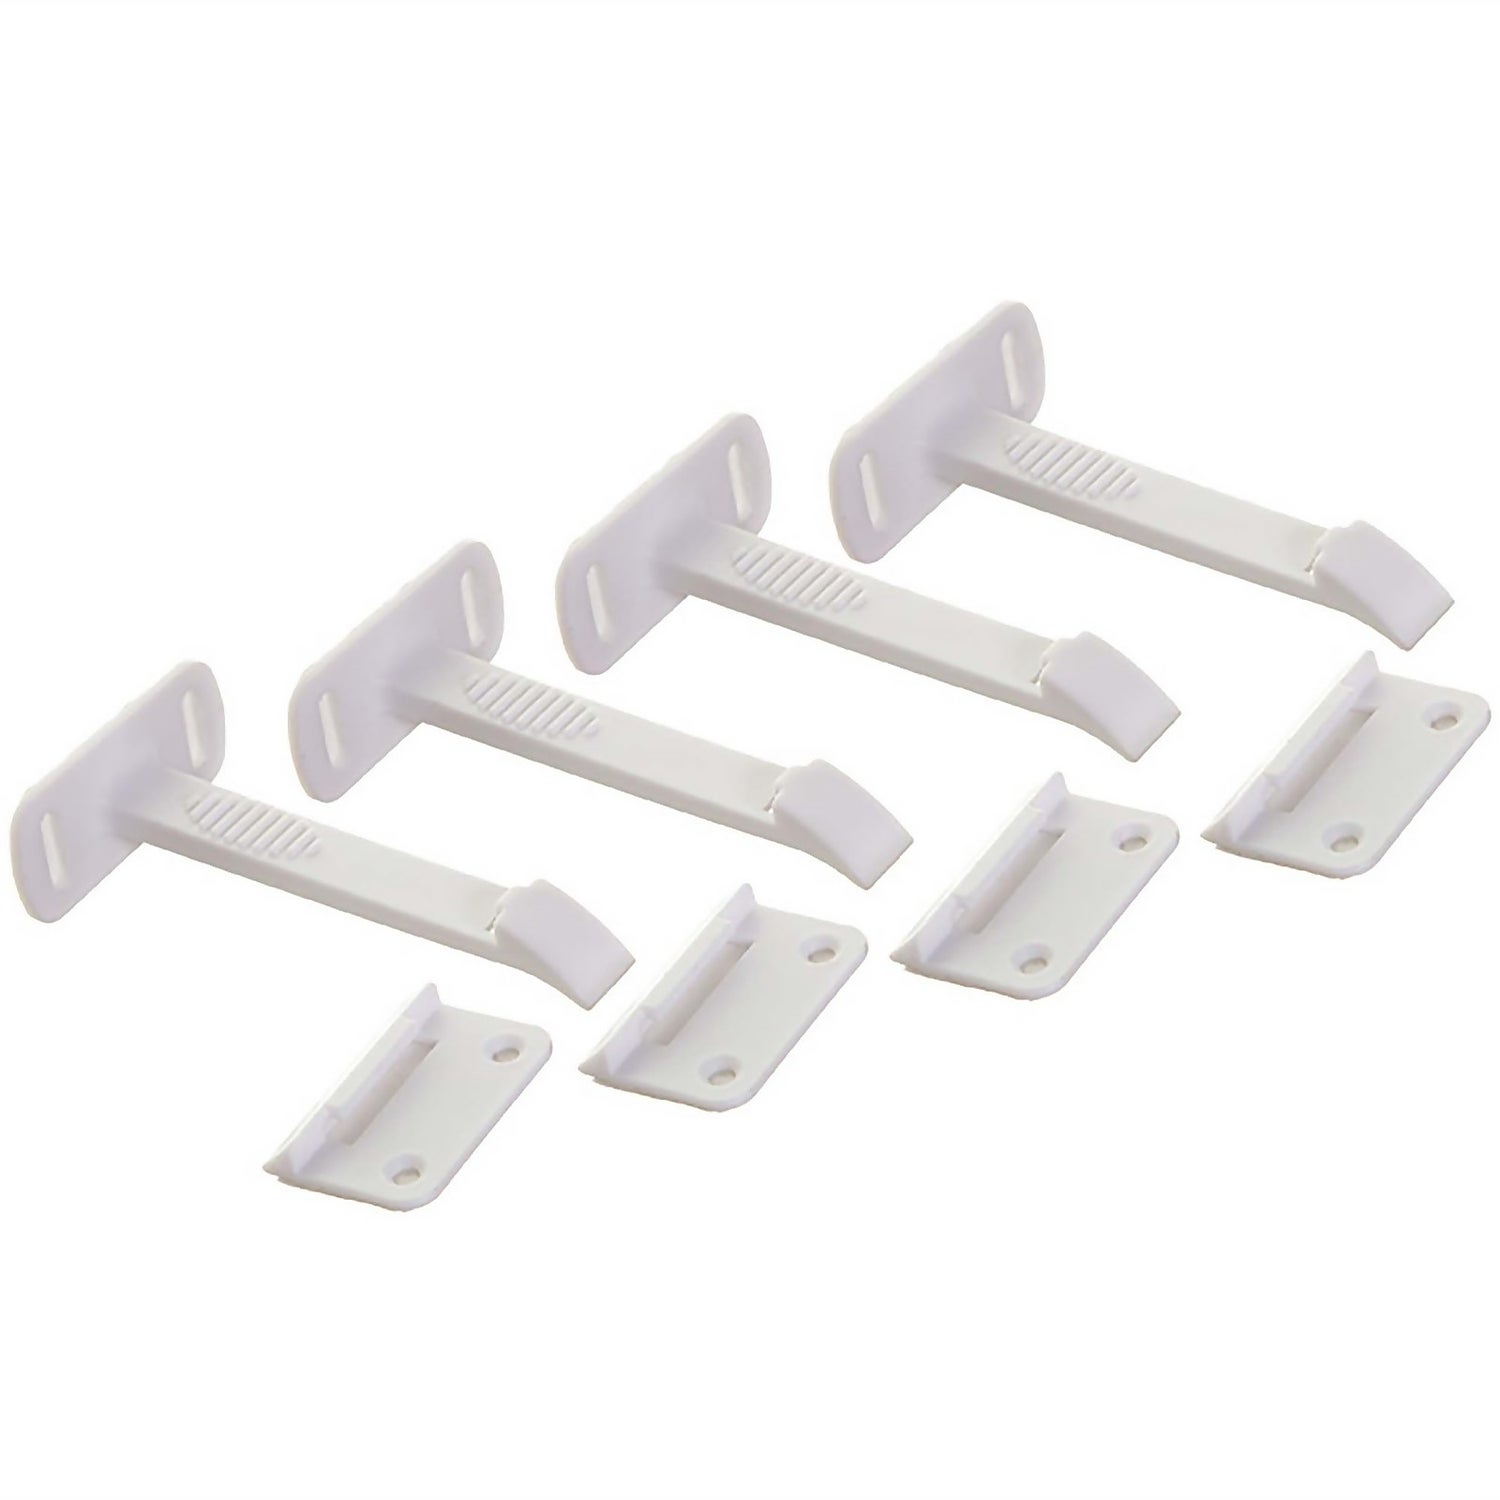 ADHESIVE SAFETY LATCHES LONG 4 PACK